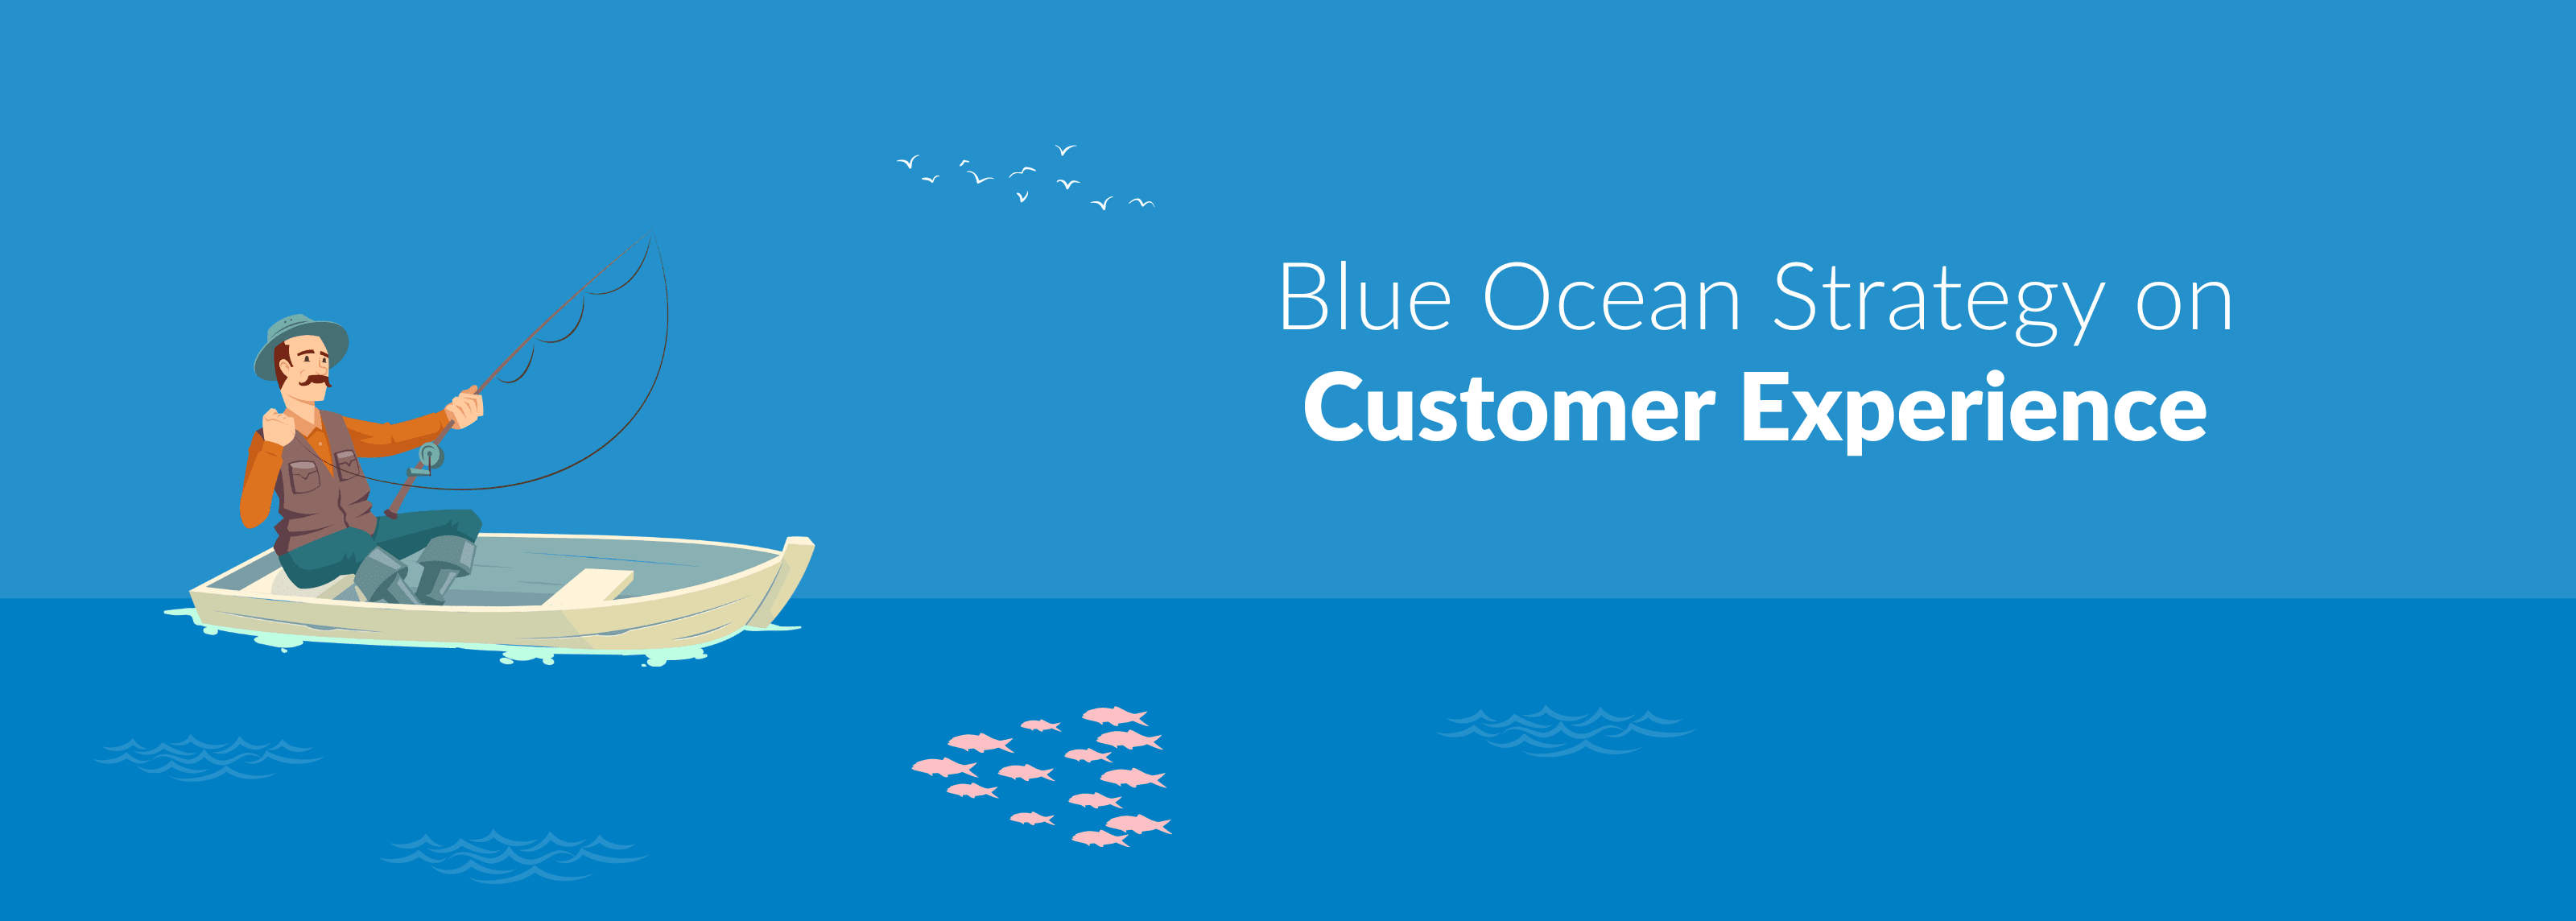 Blue Ocean Strategy on Customer Experience